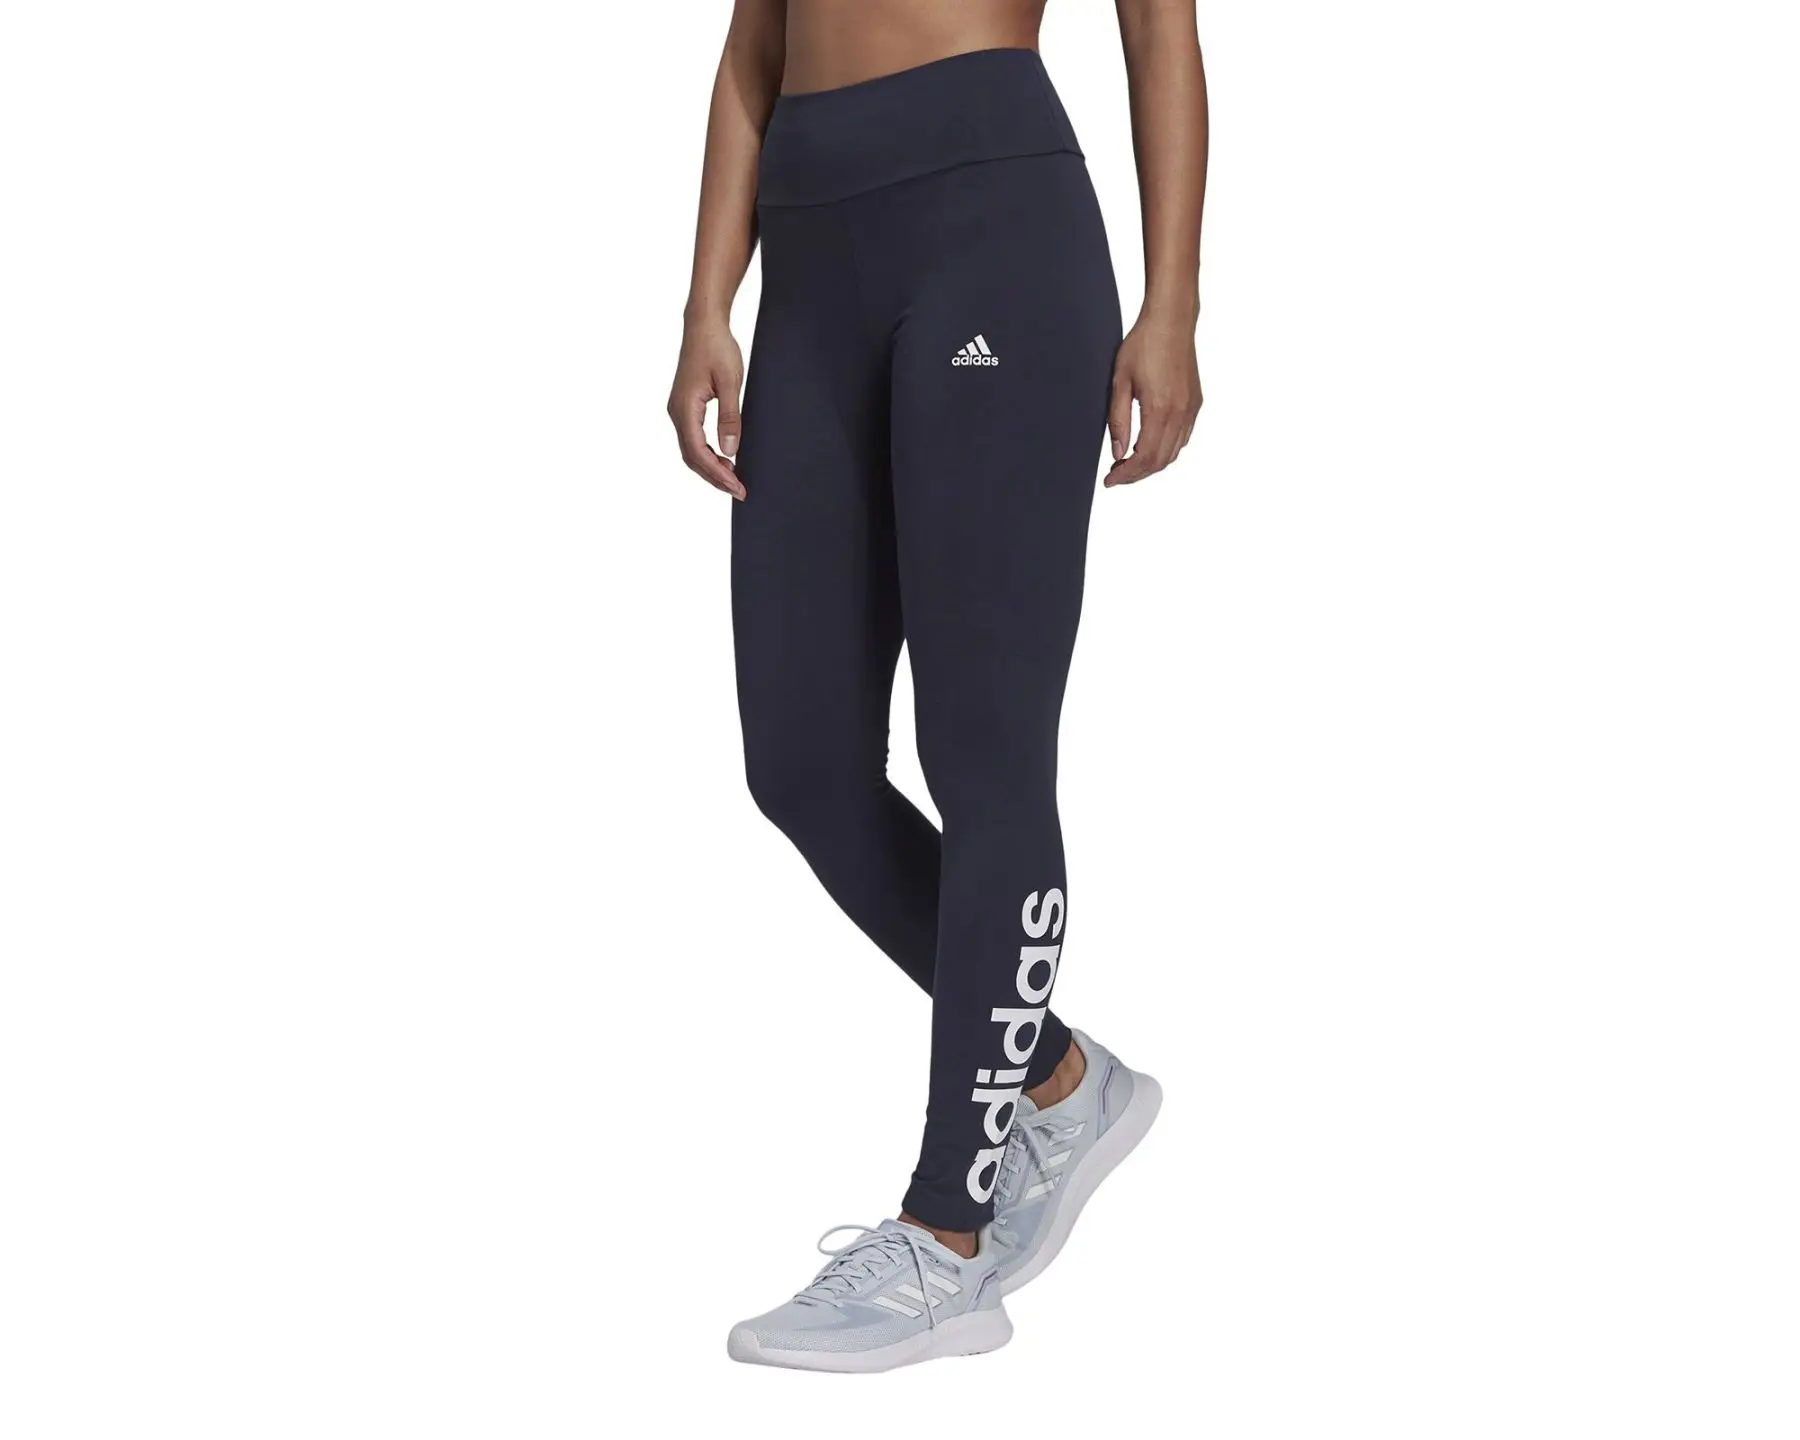 Adidas Original Women's Training Tights Navy Blue Color with High Cotton Content and High Waist Extra Comfort Sport Walking